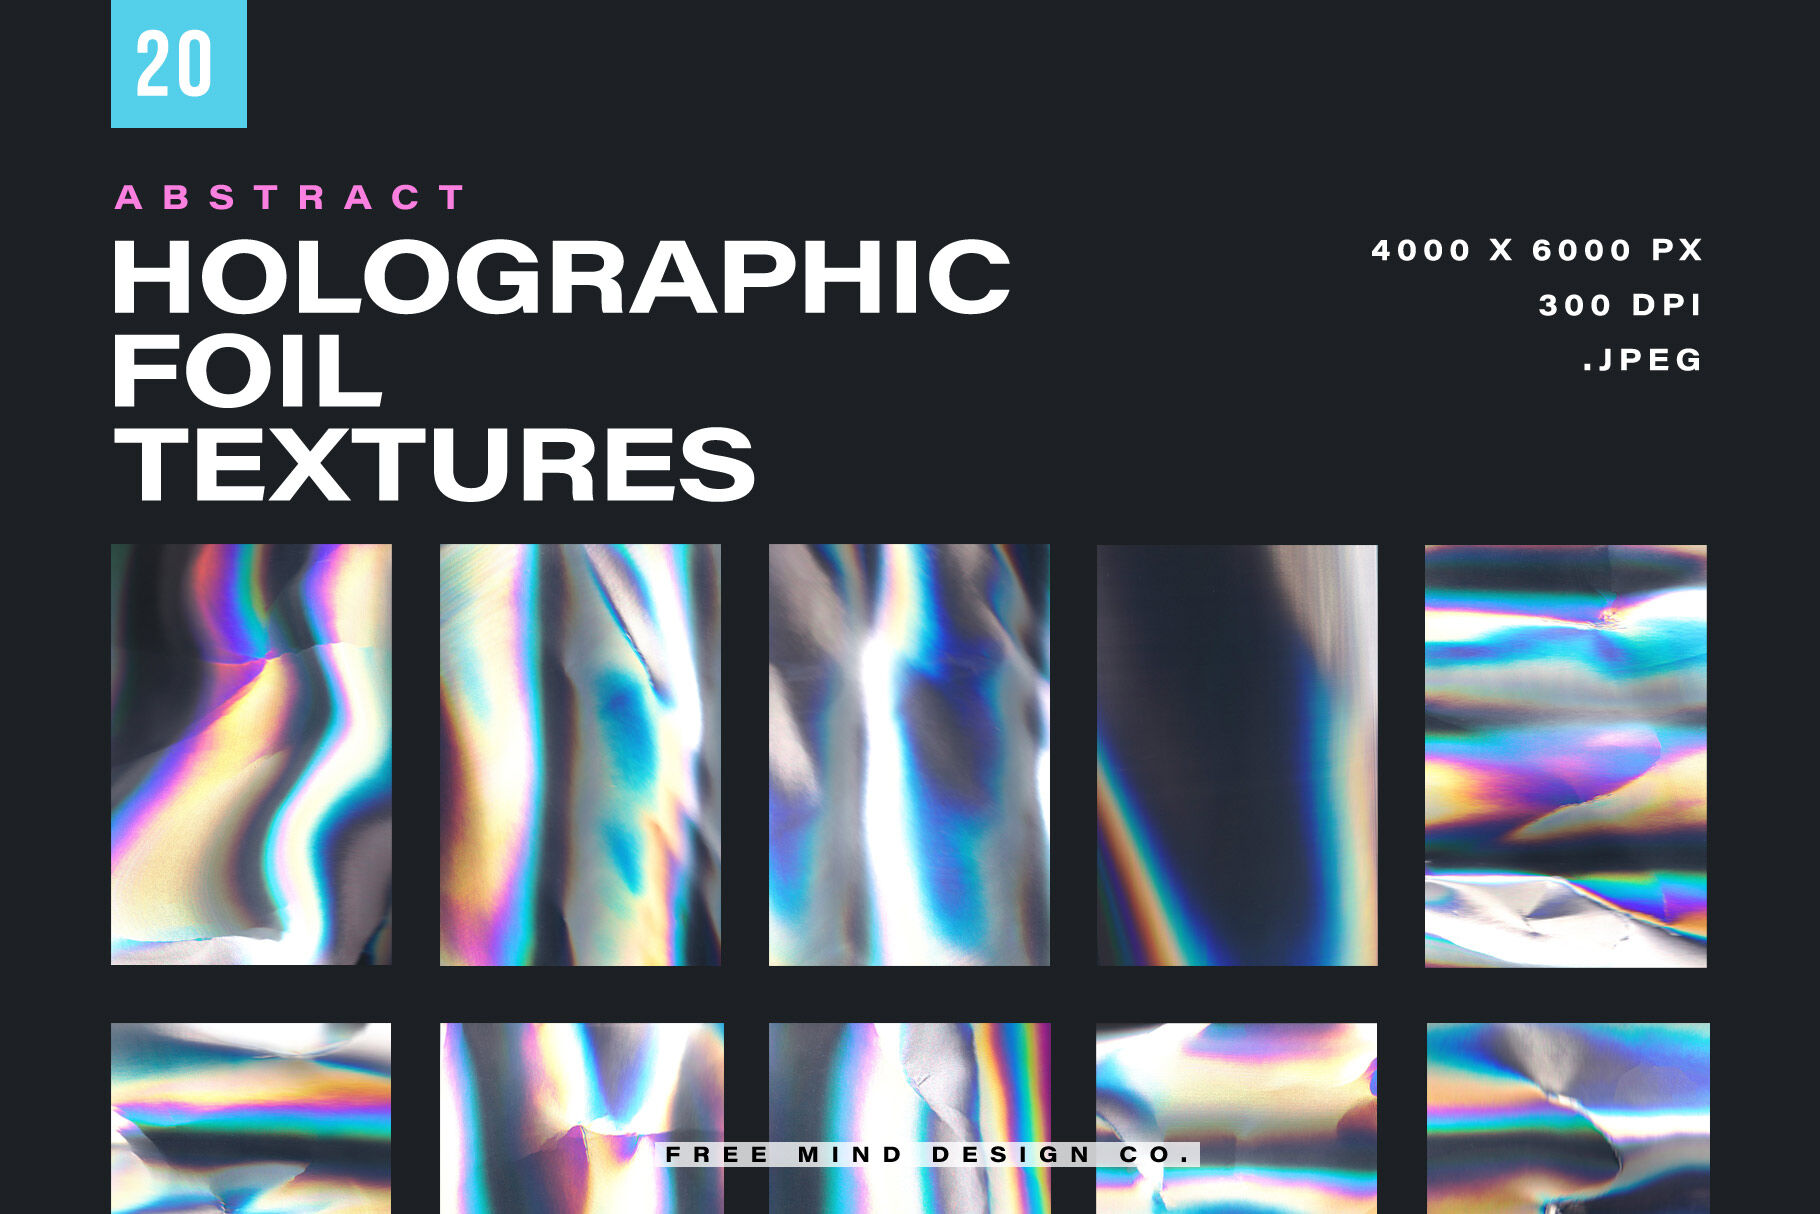 HOLOGRAPHIC FOIL TEXTURES By Free Mind Design Co. | TheHungryJPEG